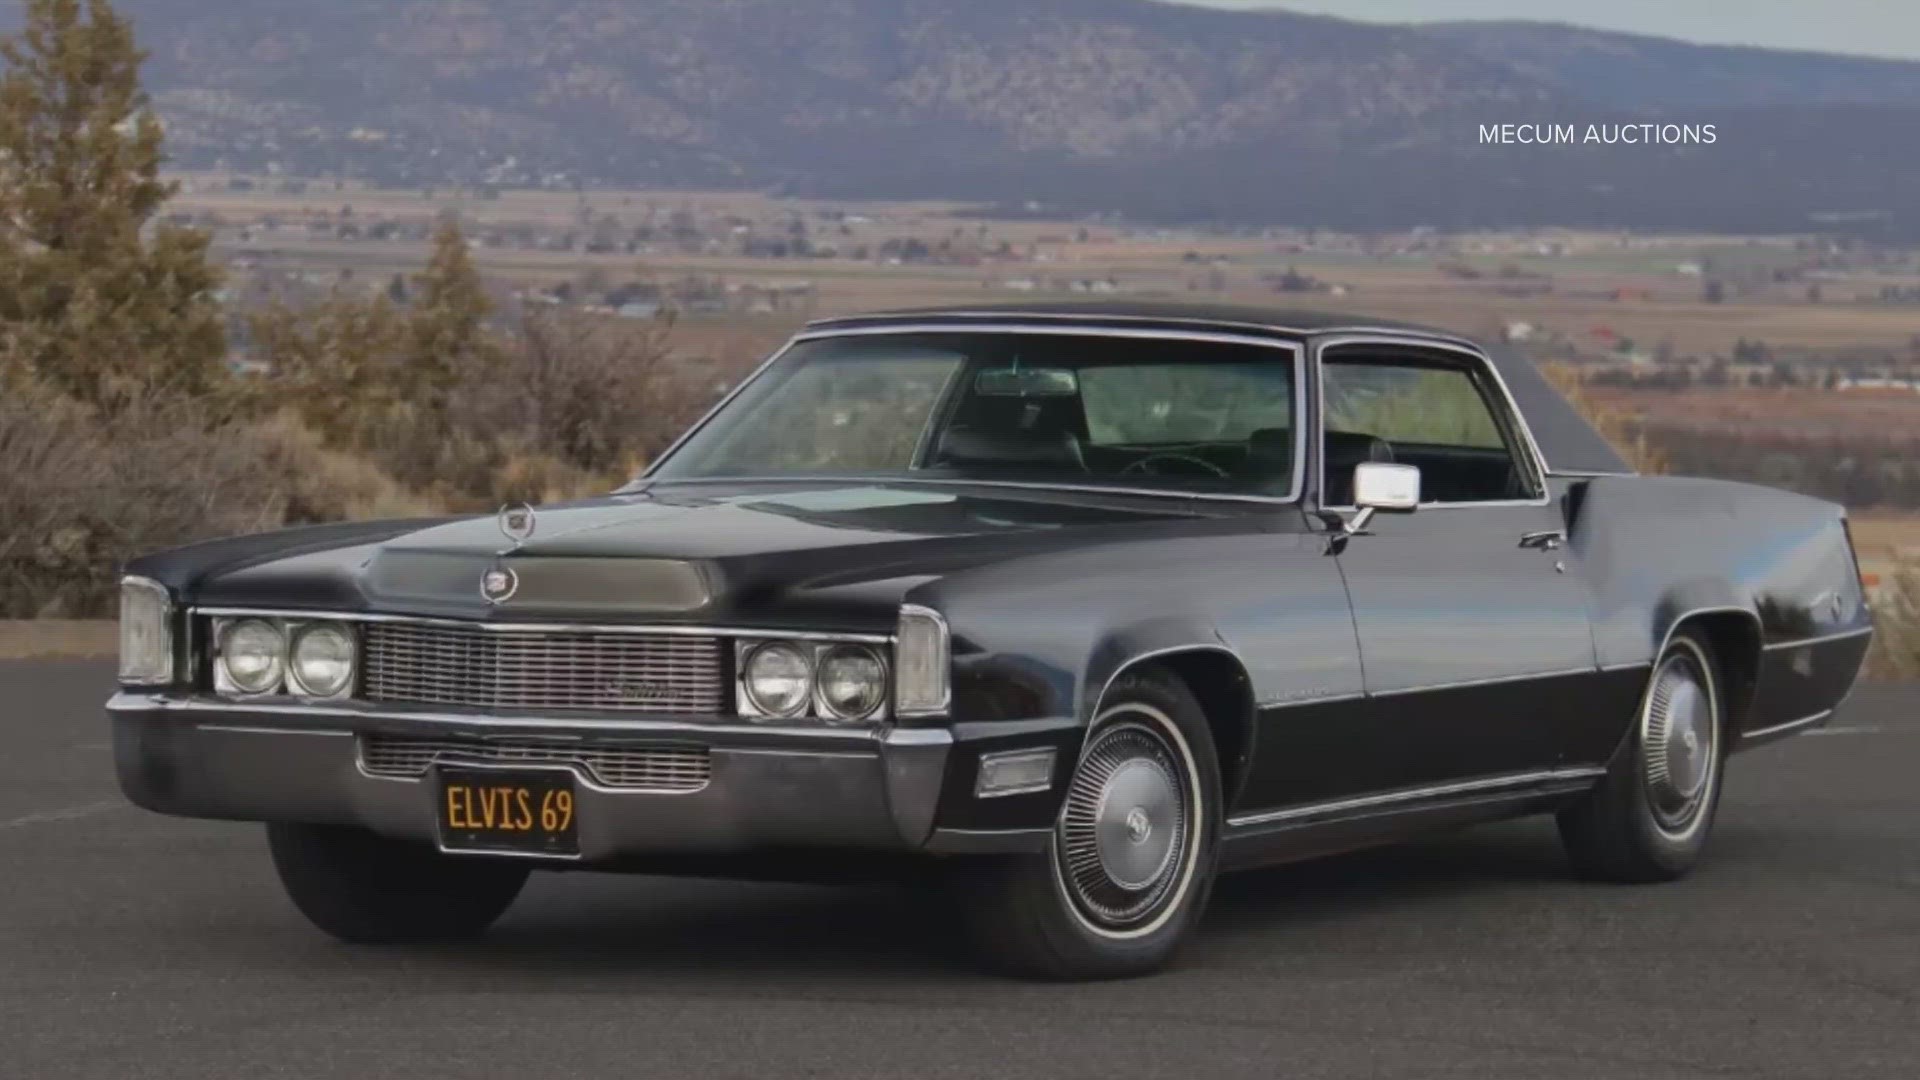 The 1969 Cadillac El Dorado was bought brand new by the King of Rock and Roll. Watch the video above to see just how much it was sold for.